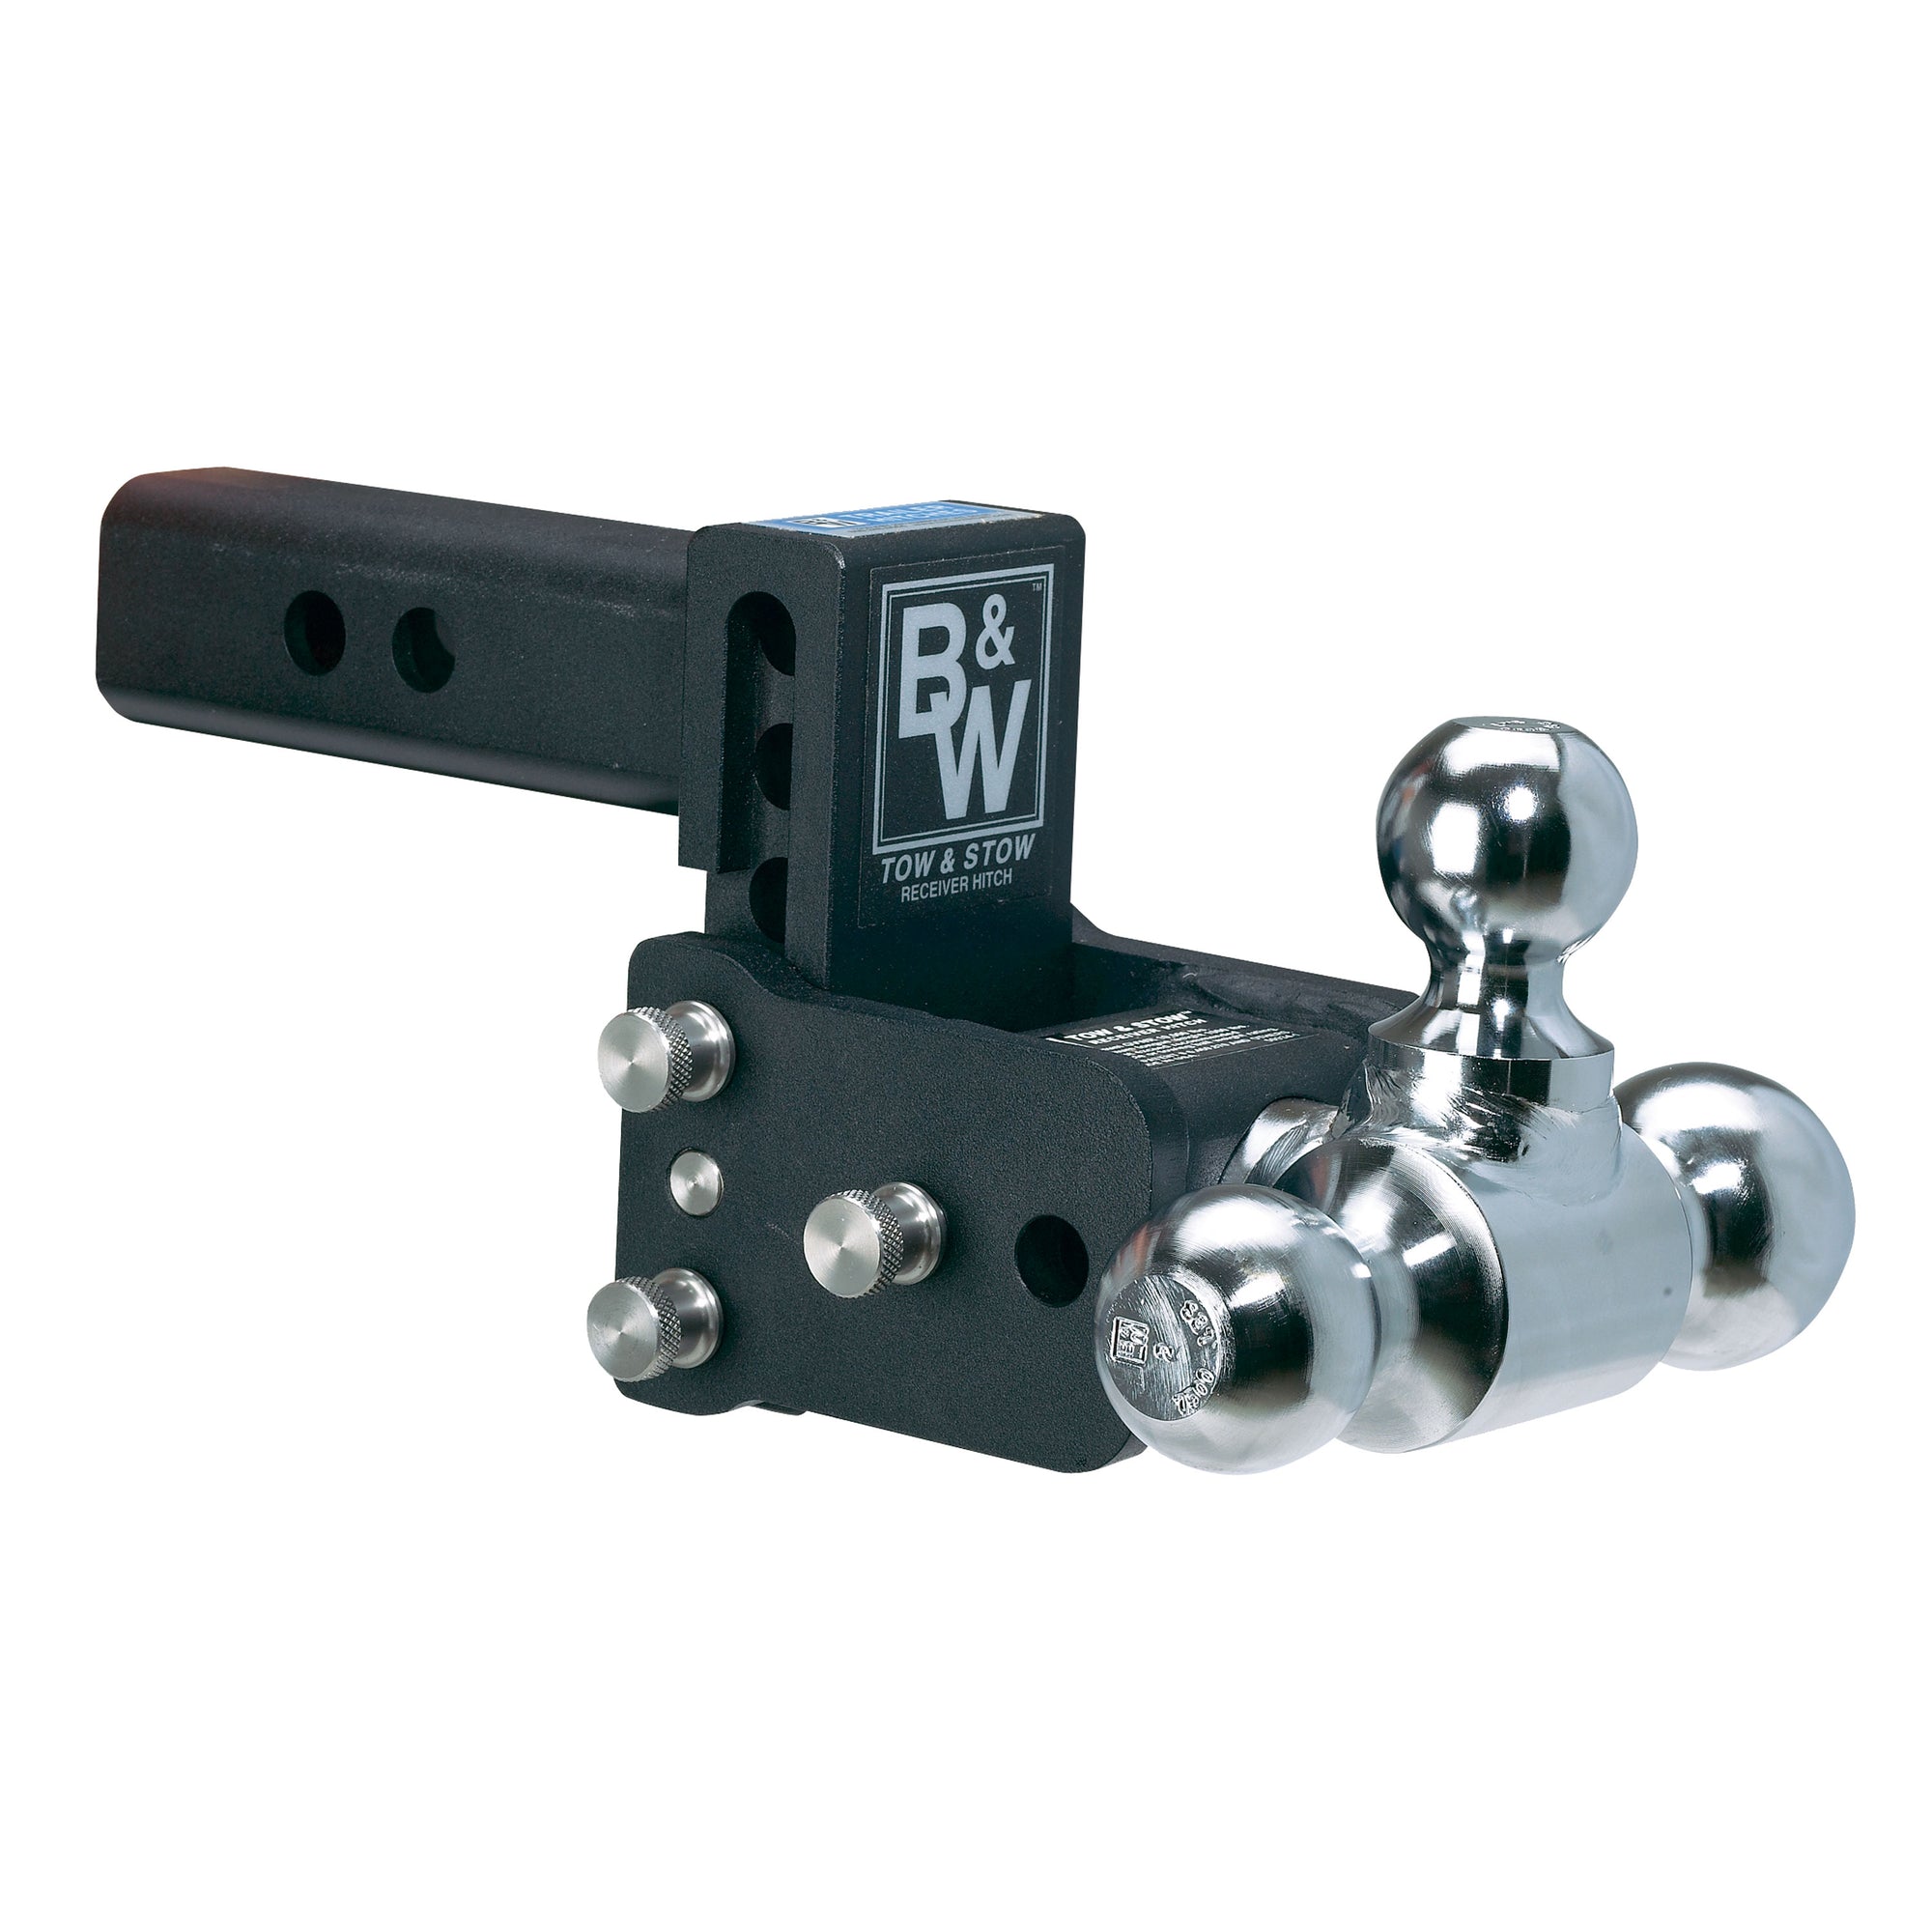 B&W Trailer Hitches TS30049B Tow and Stow Adjustable Ball Mount - 1-7/8", 2" & 2-5/16" Ball, 7.5" Drop, 7" Rise, Black